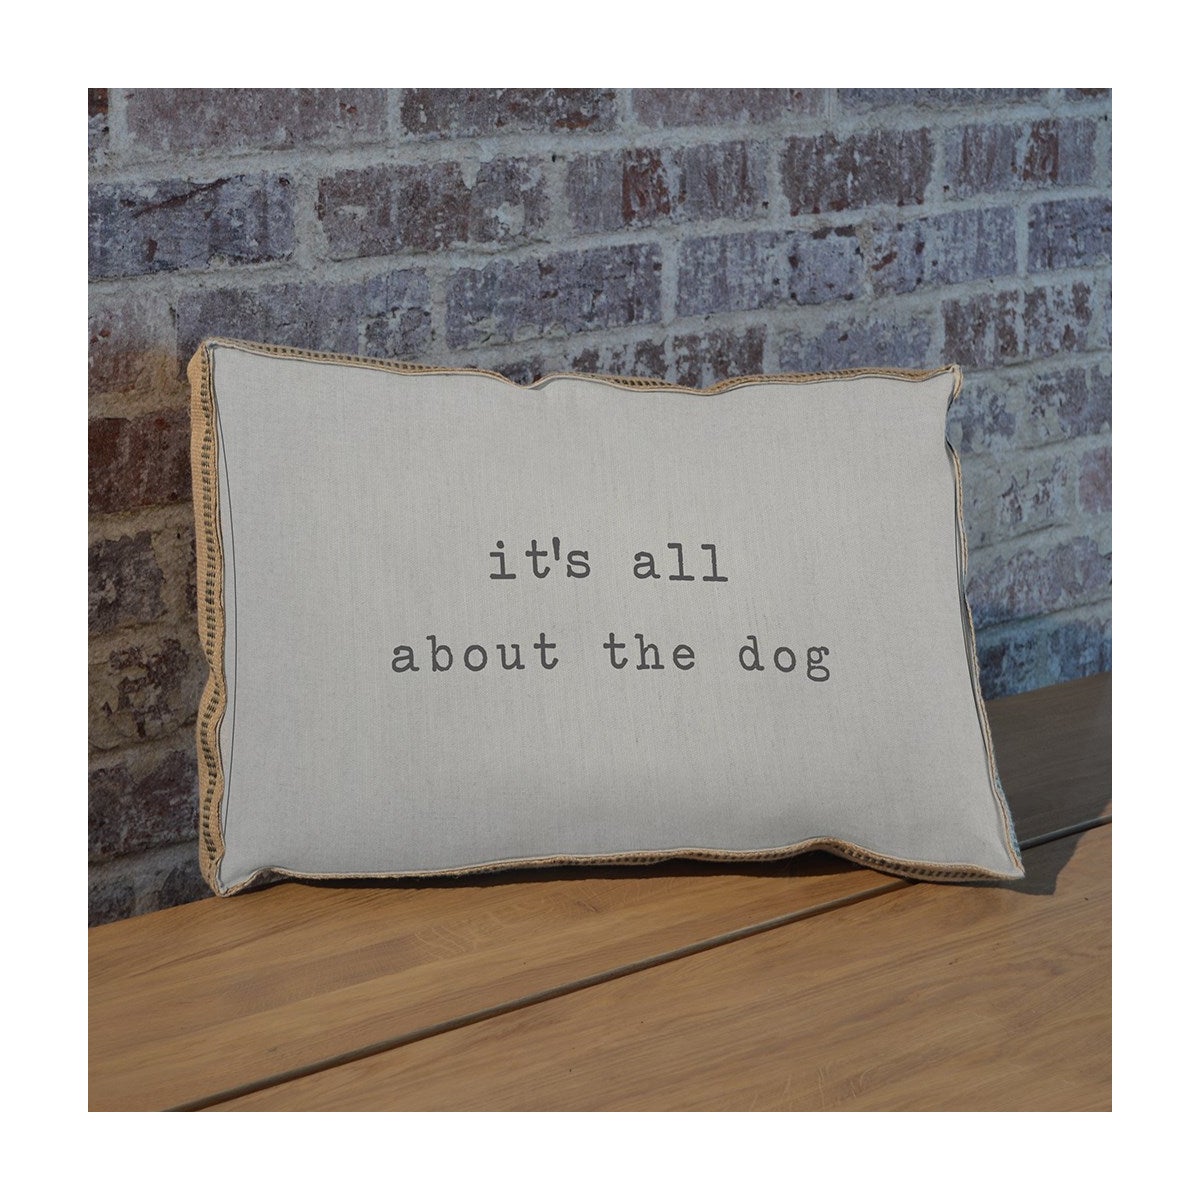 It's all about the dog pillow